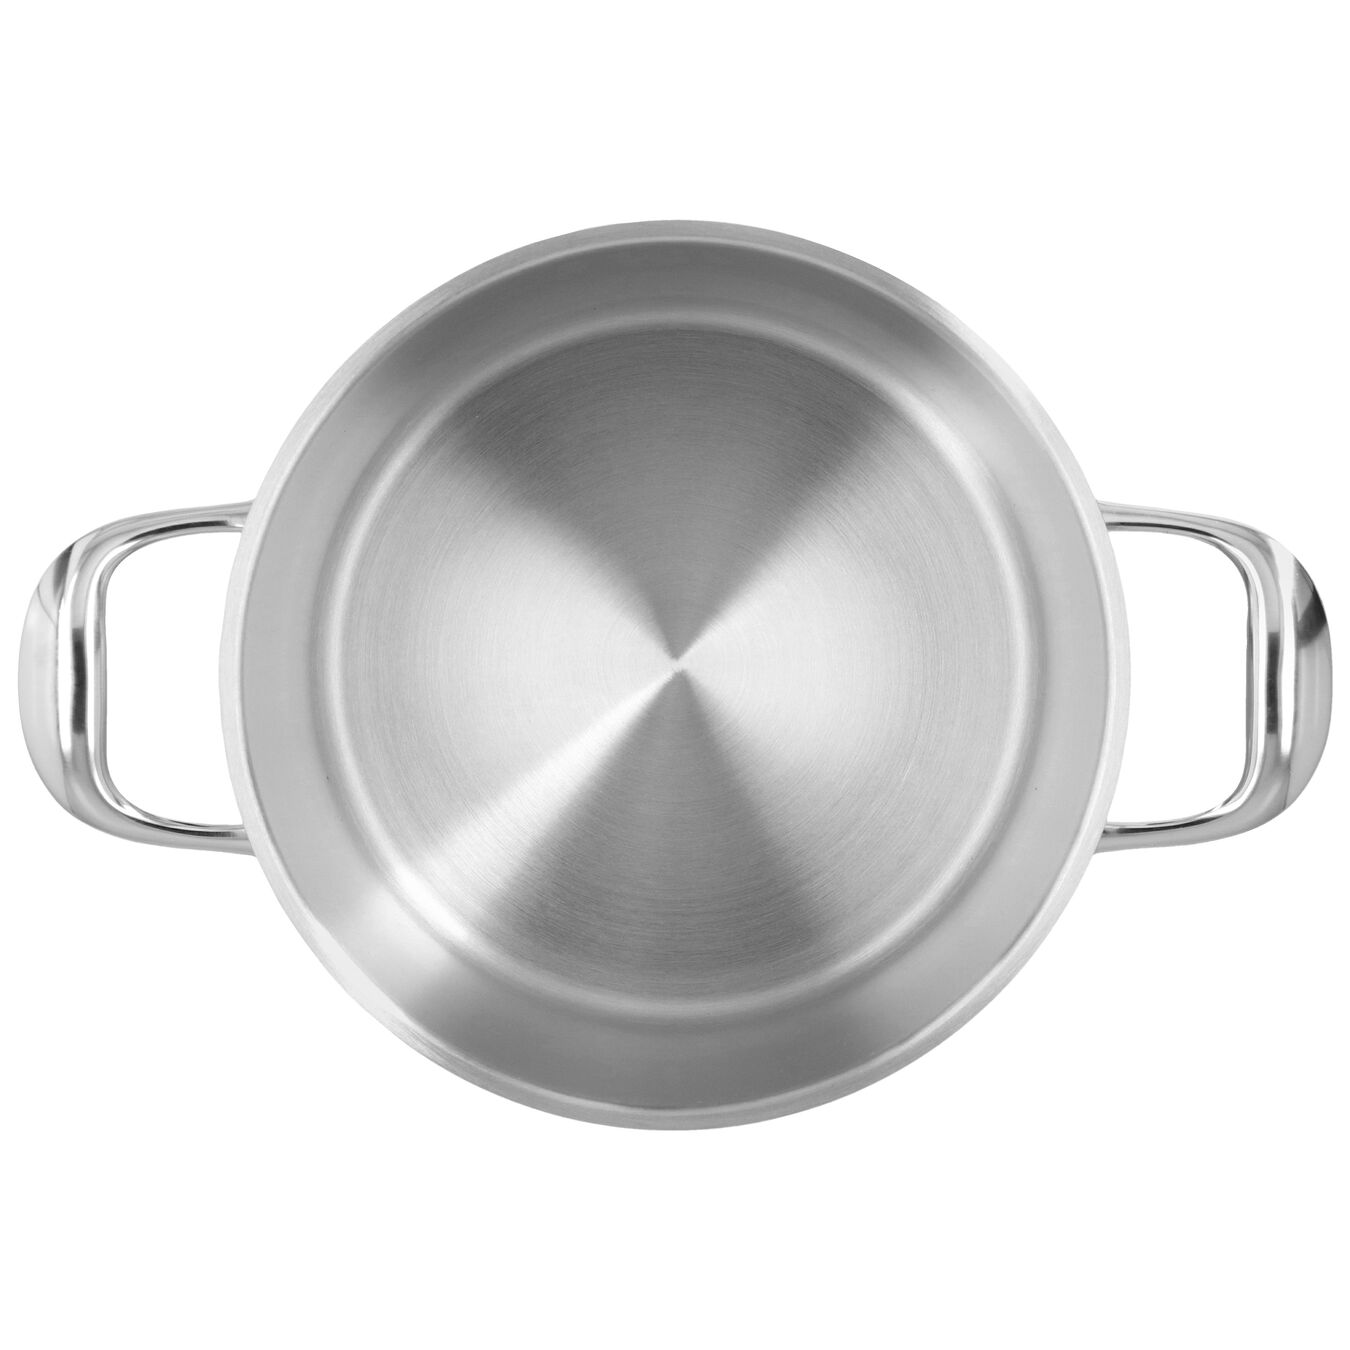 5 l 18/10 Stainless Steel Stock pot with lid,,large 3